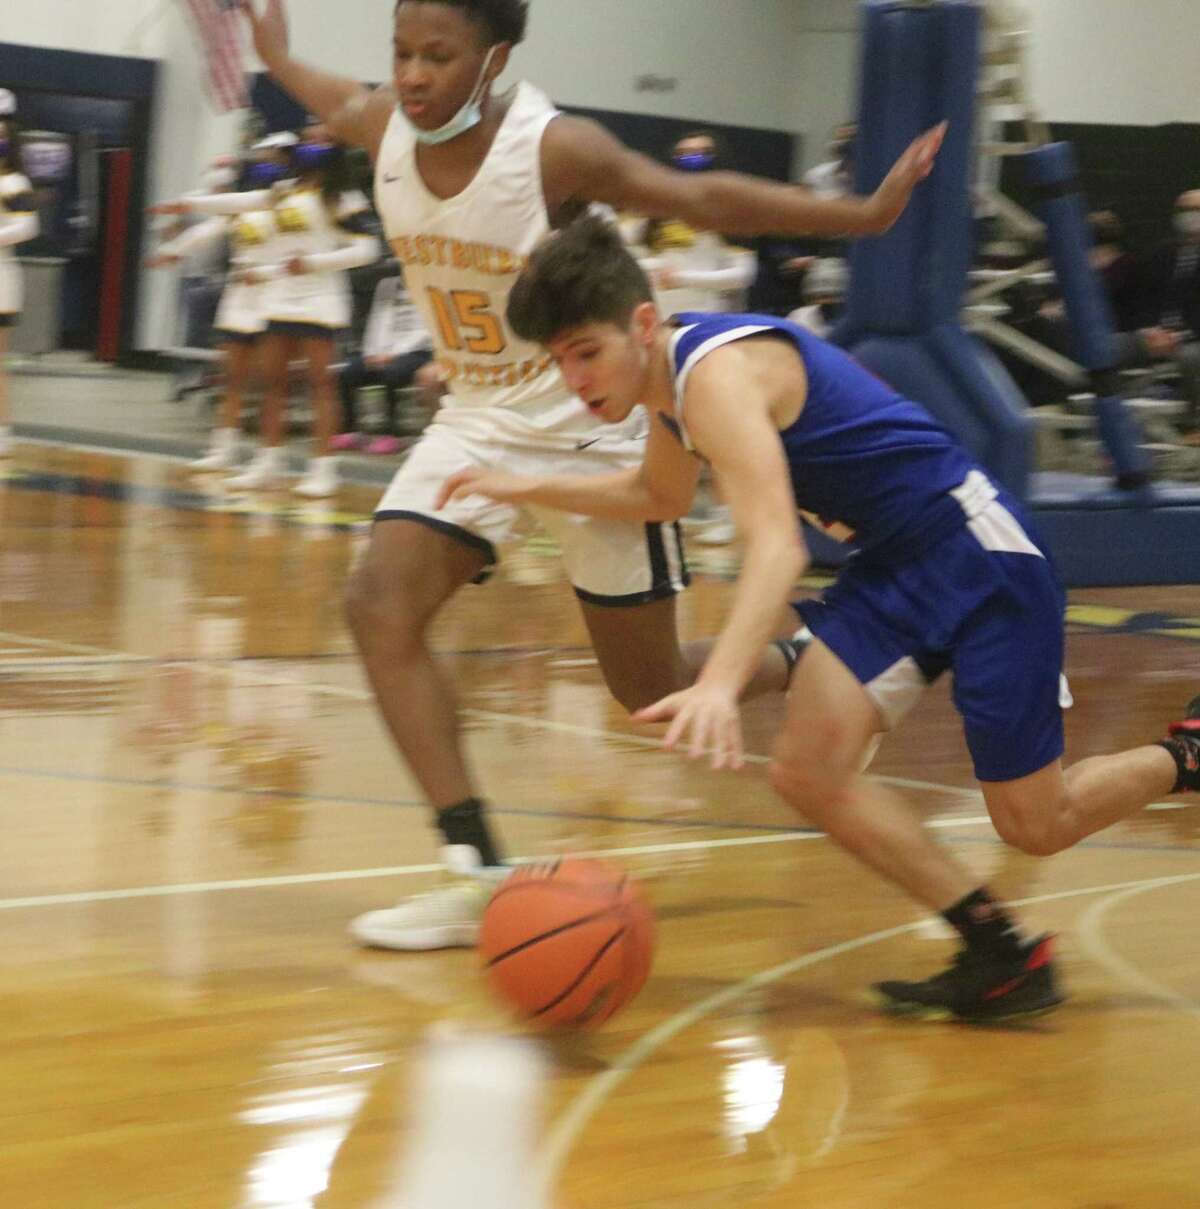 Pasadena-FBCA's Nick Gay hurries to get  the ball up the floor against the defense of Westbury Christian's Jared Duplechin Tuesday night.